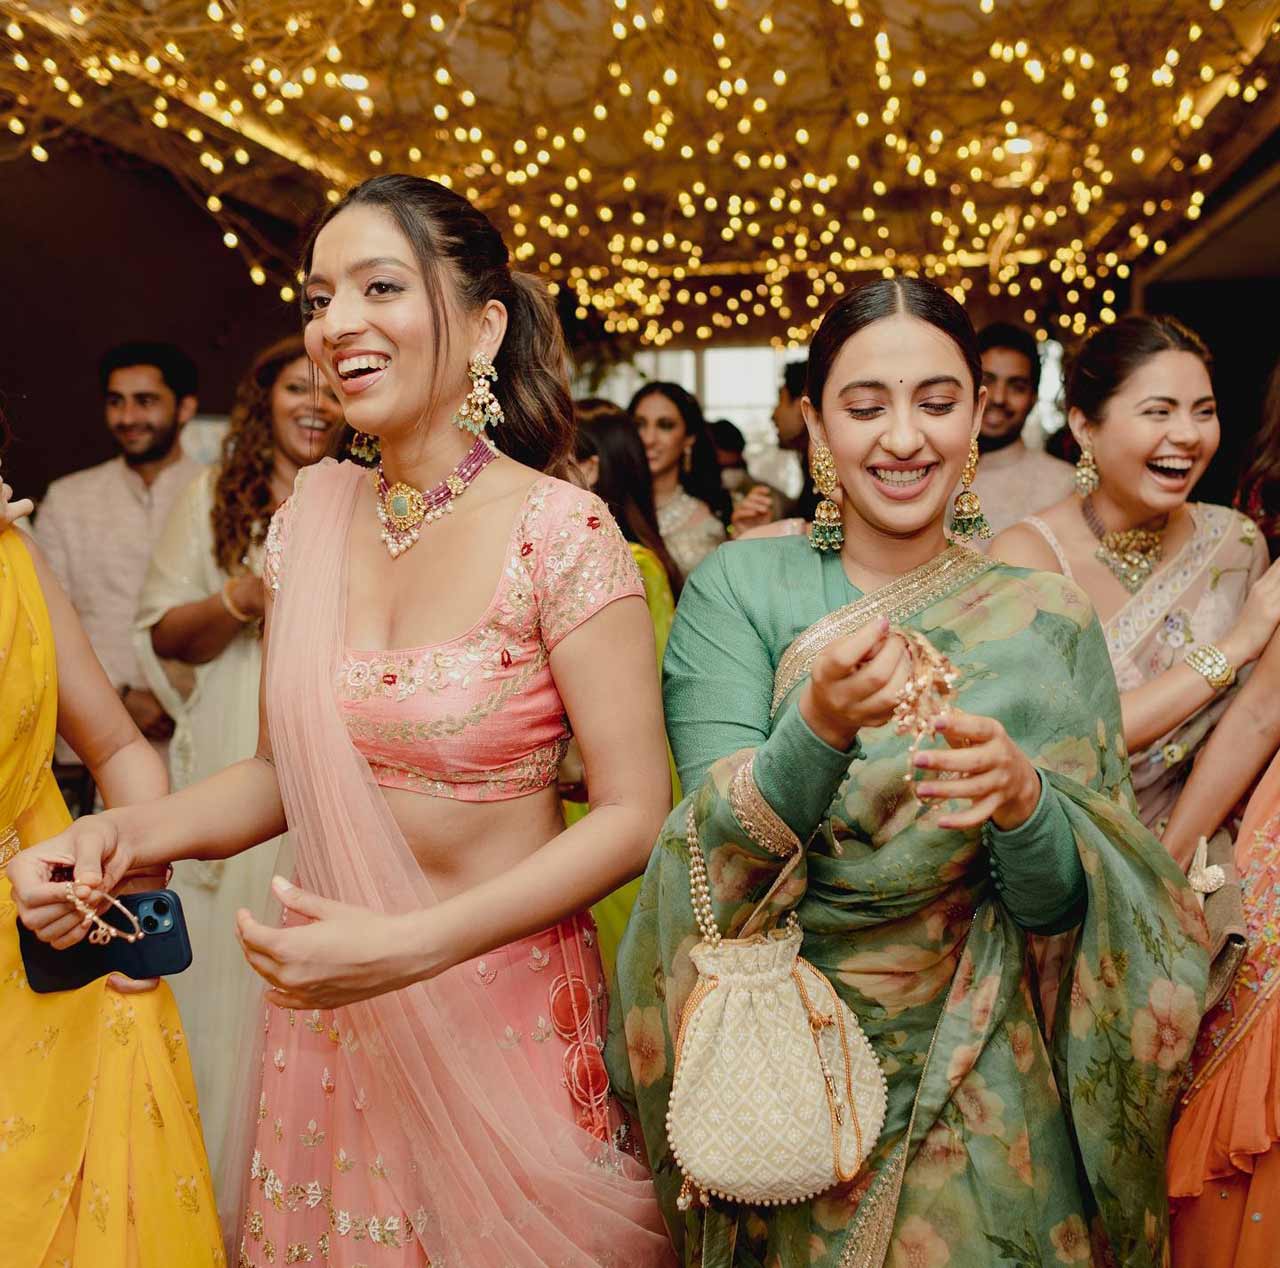 Alia Bhatt's friend Tanya Saha Gupta shared some heart-warming pictures from the actress' wedding with Ranbir Kapoor. Alia, Ranbir and the girl gang, seem to have loads of fun and happy moments at the ceremony, and these photos are proof!